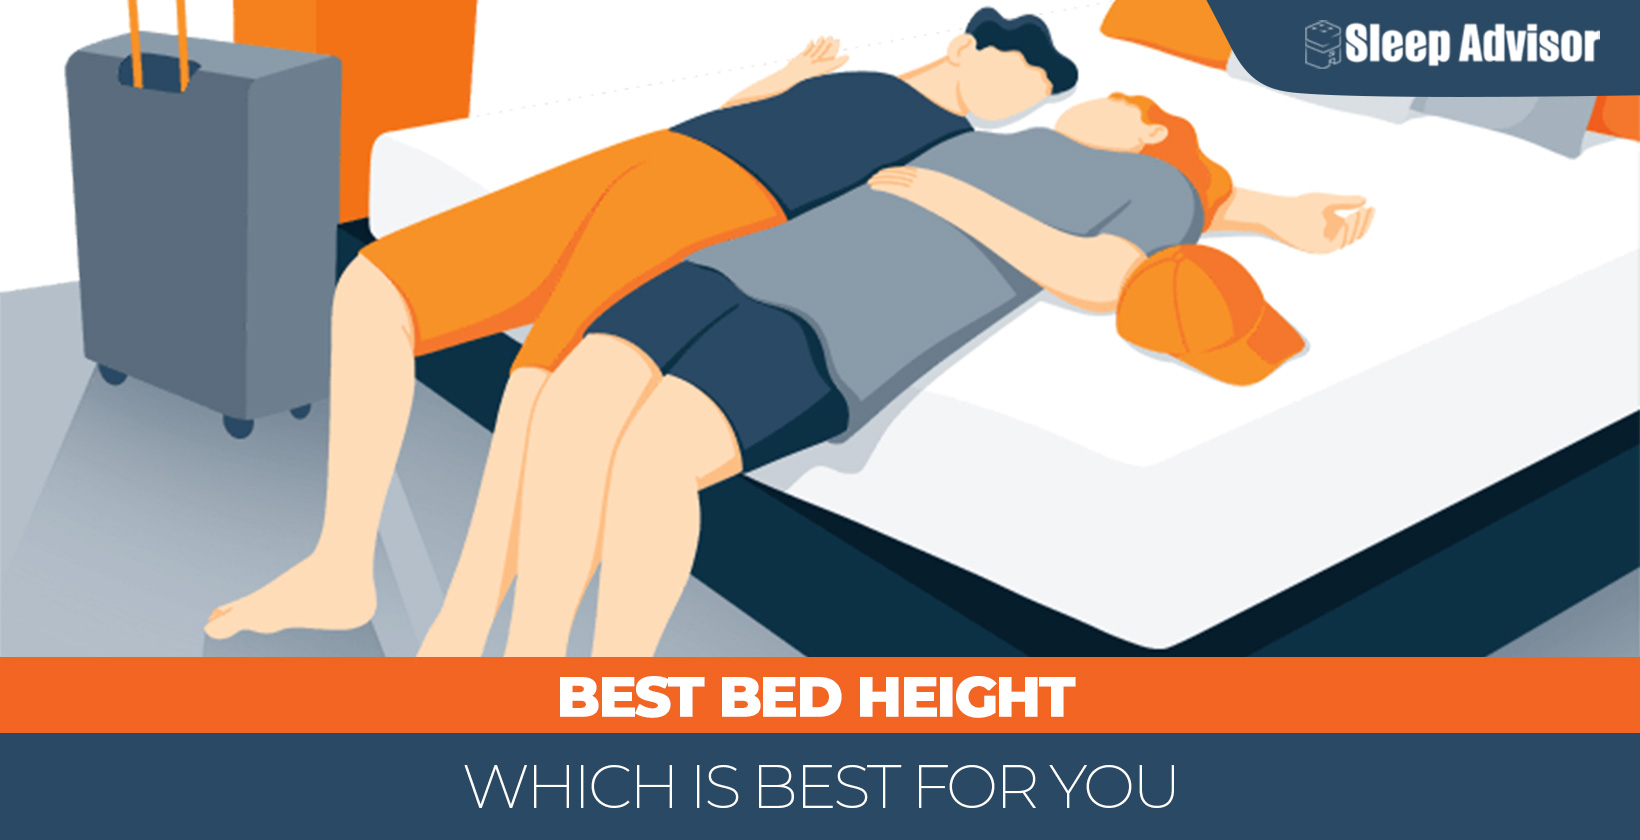 Best Bed Height: Which is Best for You?